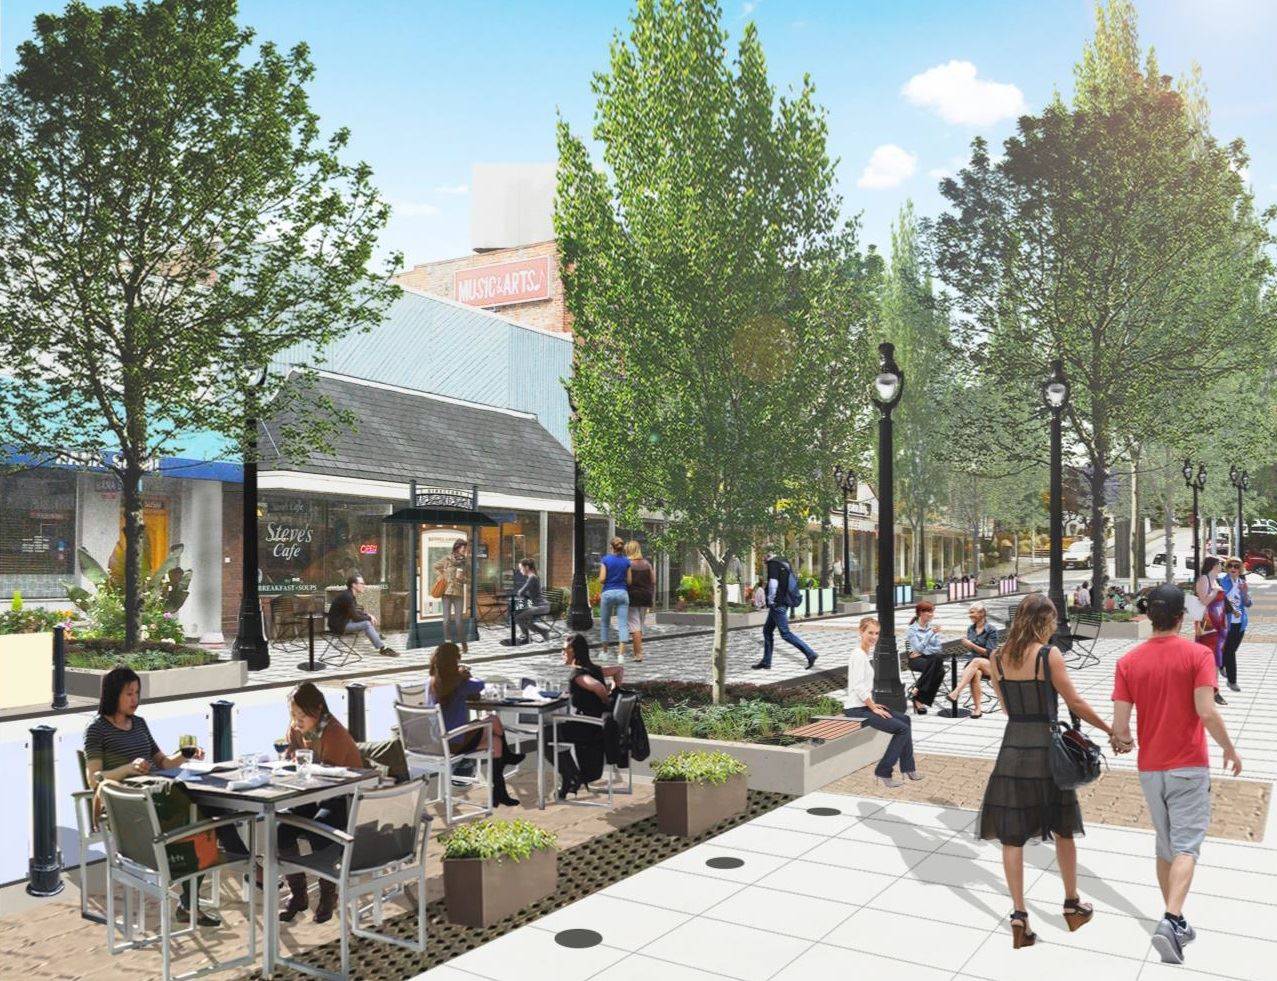 An artist’s rendering shows what Main Street will look like once the enhancements are complete. City of Bothell/Submitted art